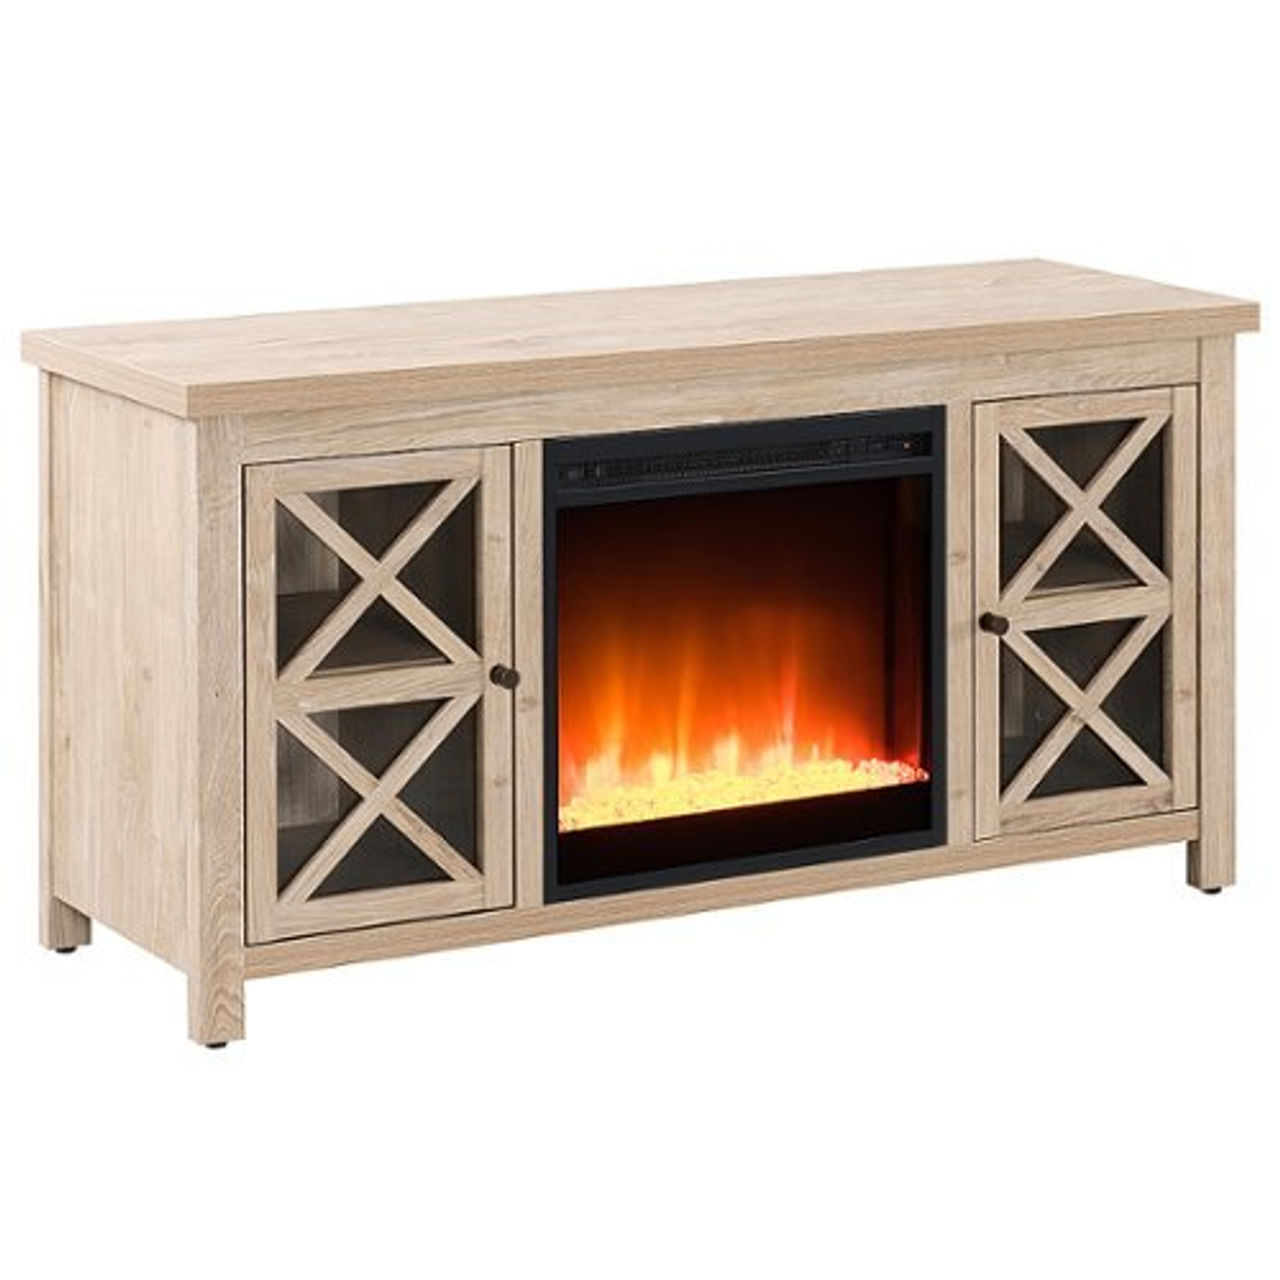 Camden&Wells - Colton Crystal Fireplace TV Stand for TVs up to 55" - White Oak